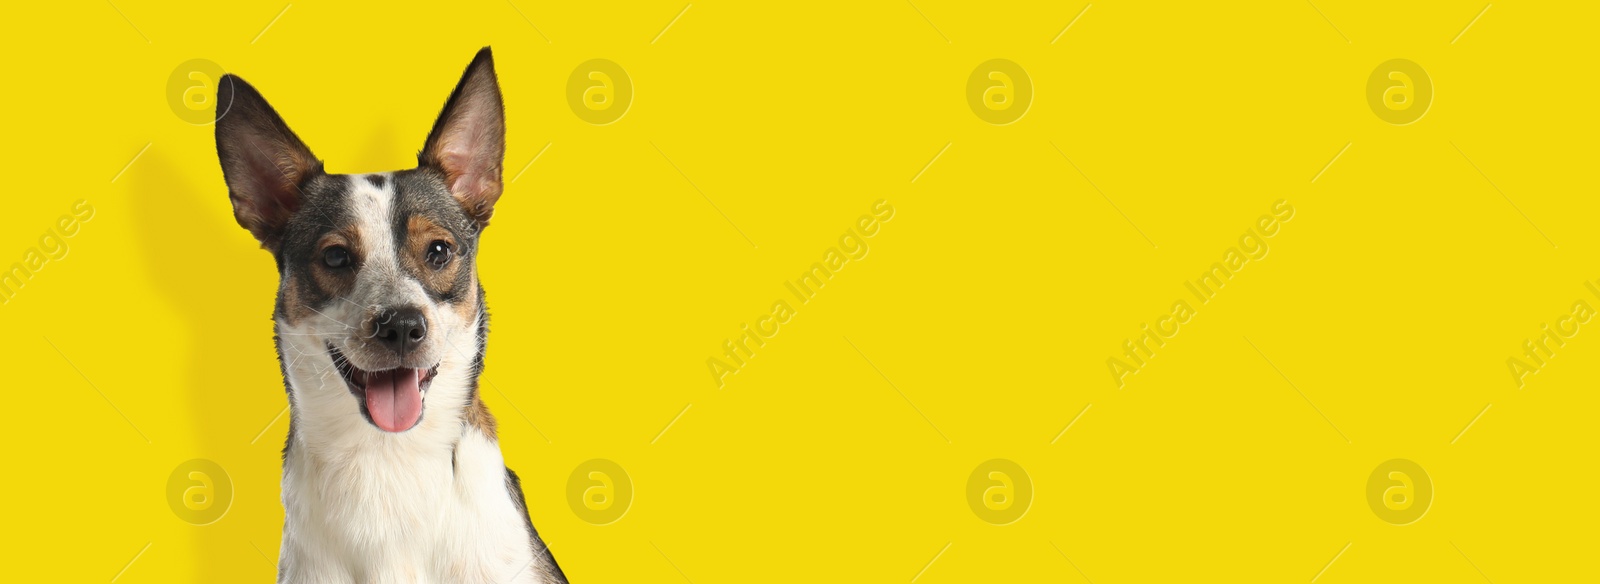 Image of Happy pet. Cute dog smiling on yellow background, space for text. Banner design